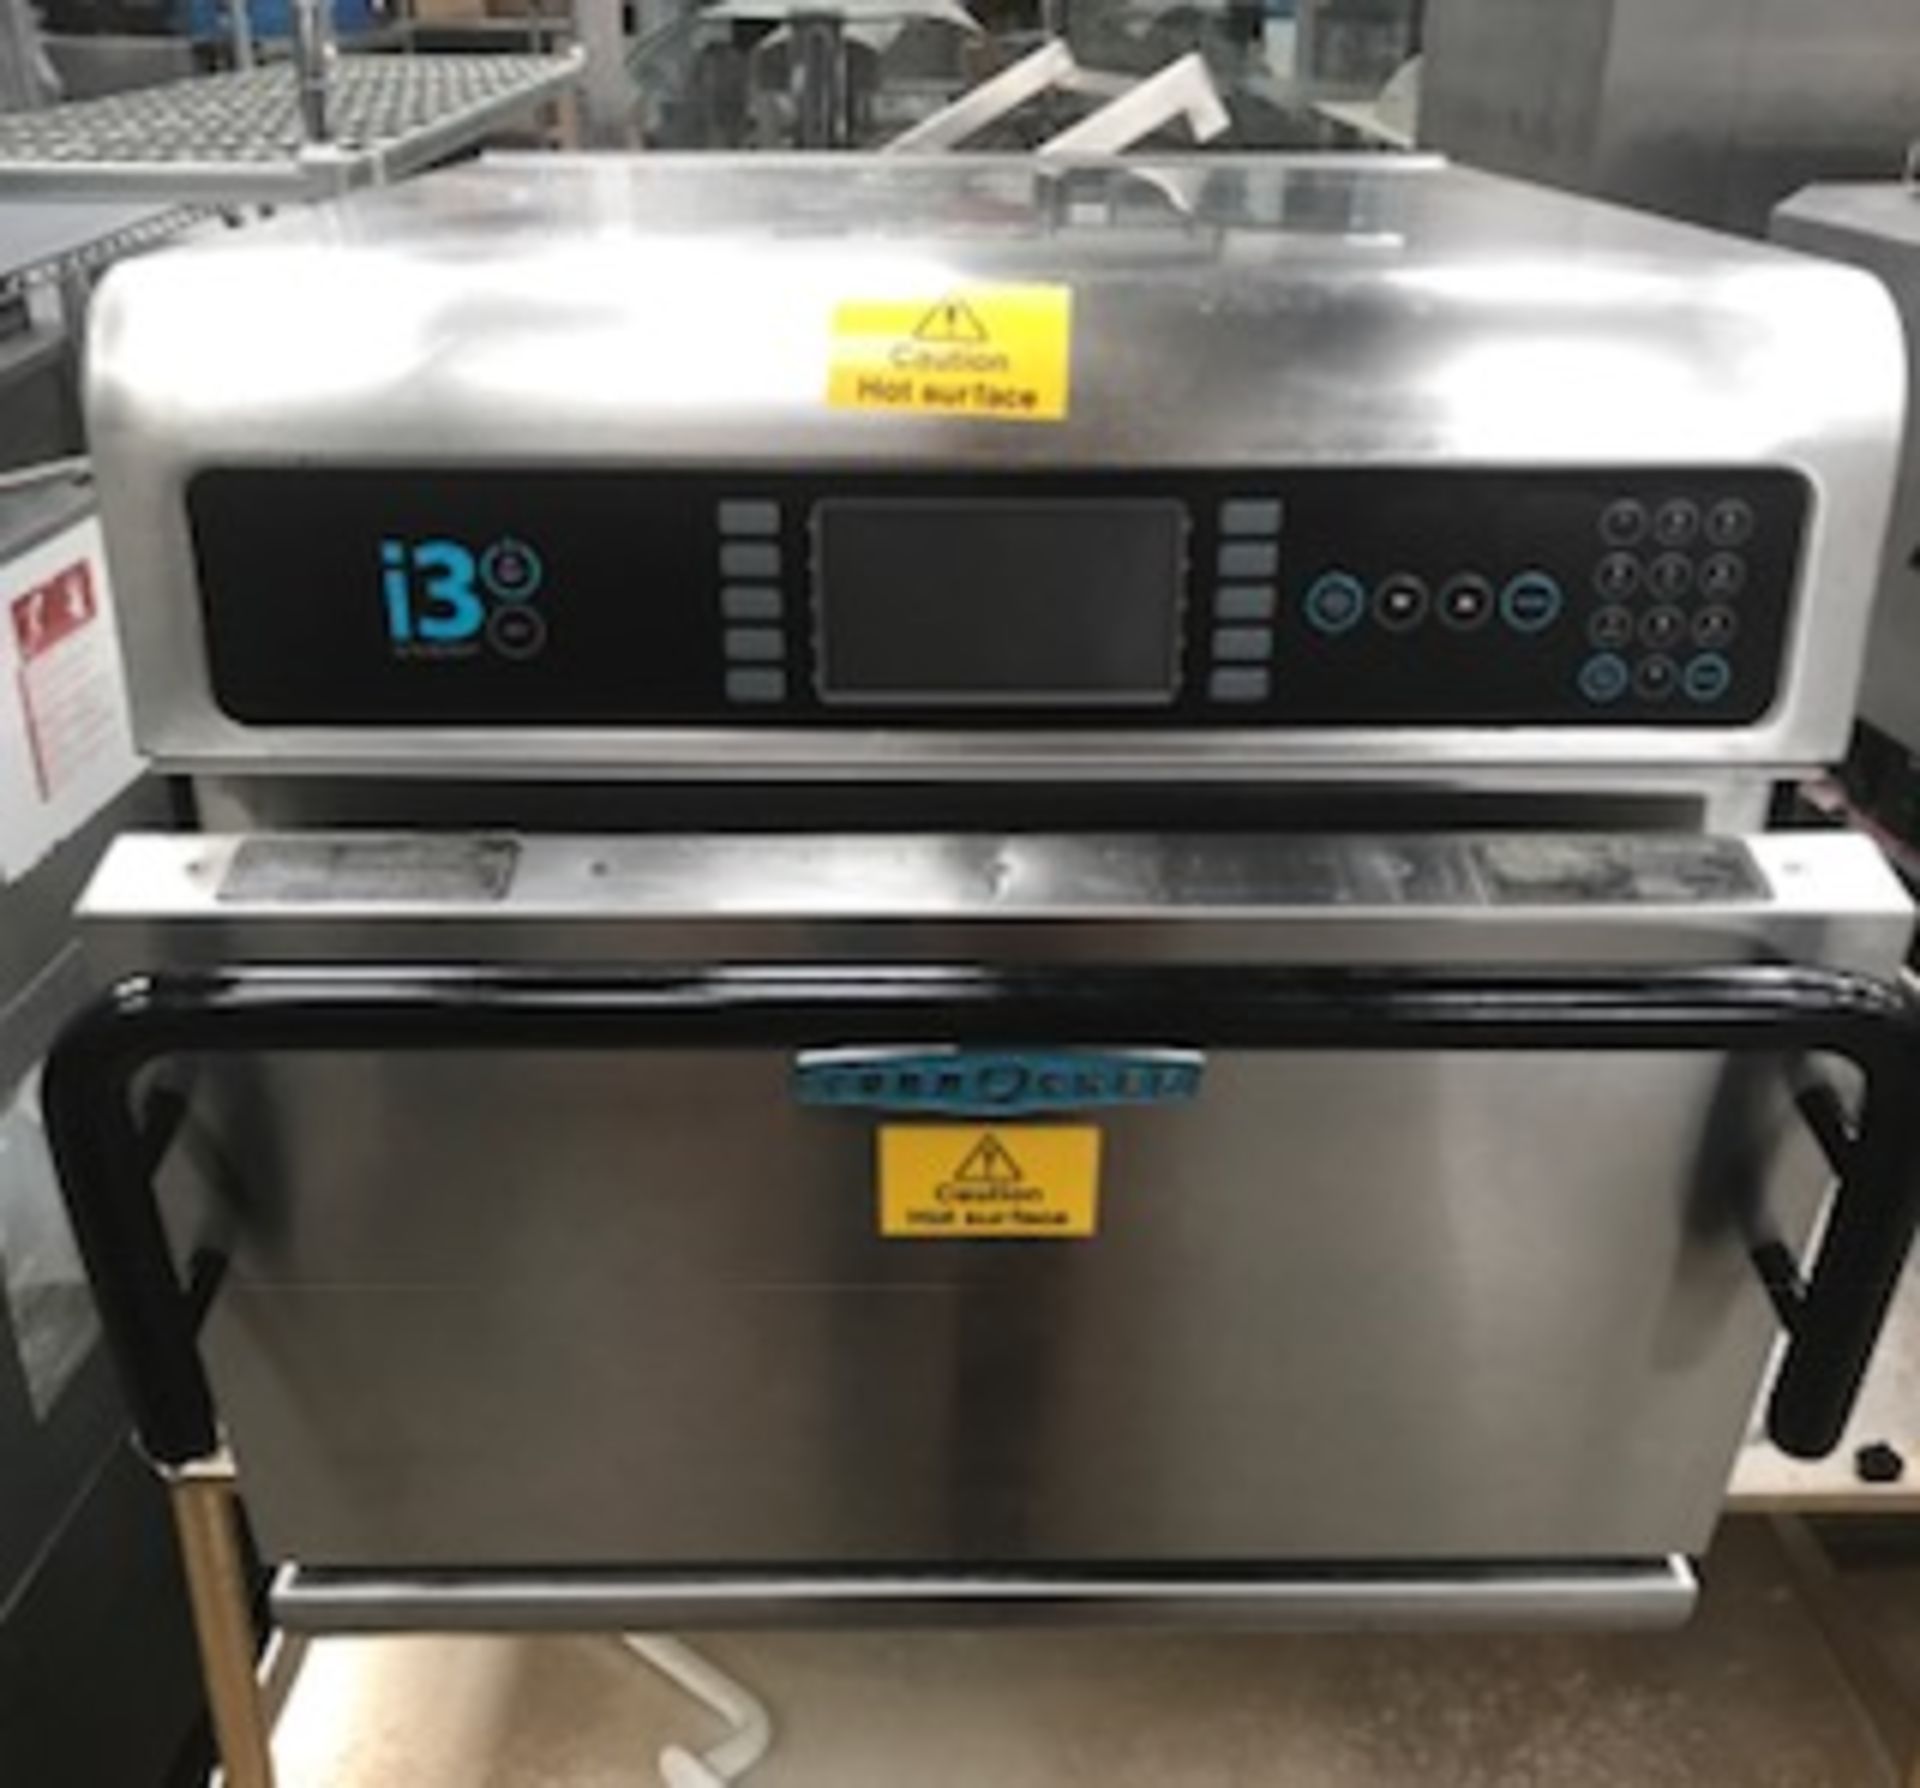 TurboChef I3 TurboChef Electric convection Oven Used but in great condition, prepared and taken care - Image 2 of 3